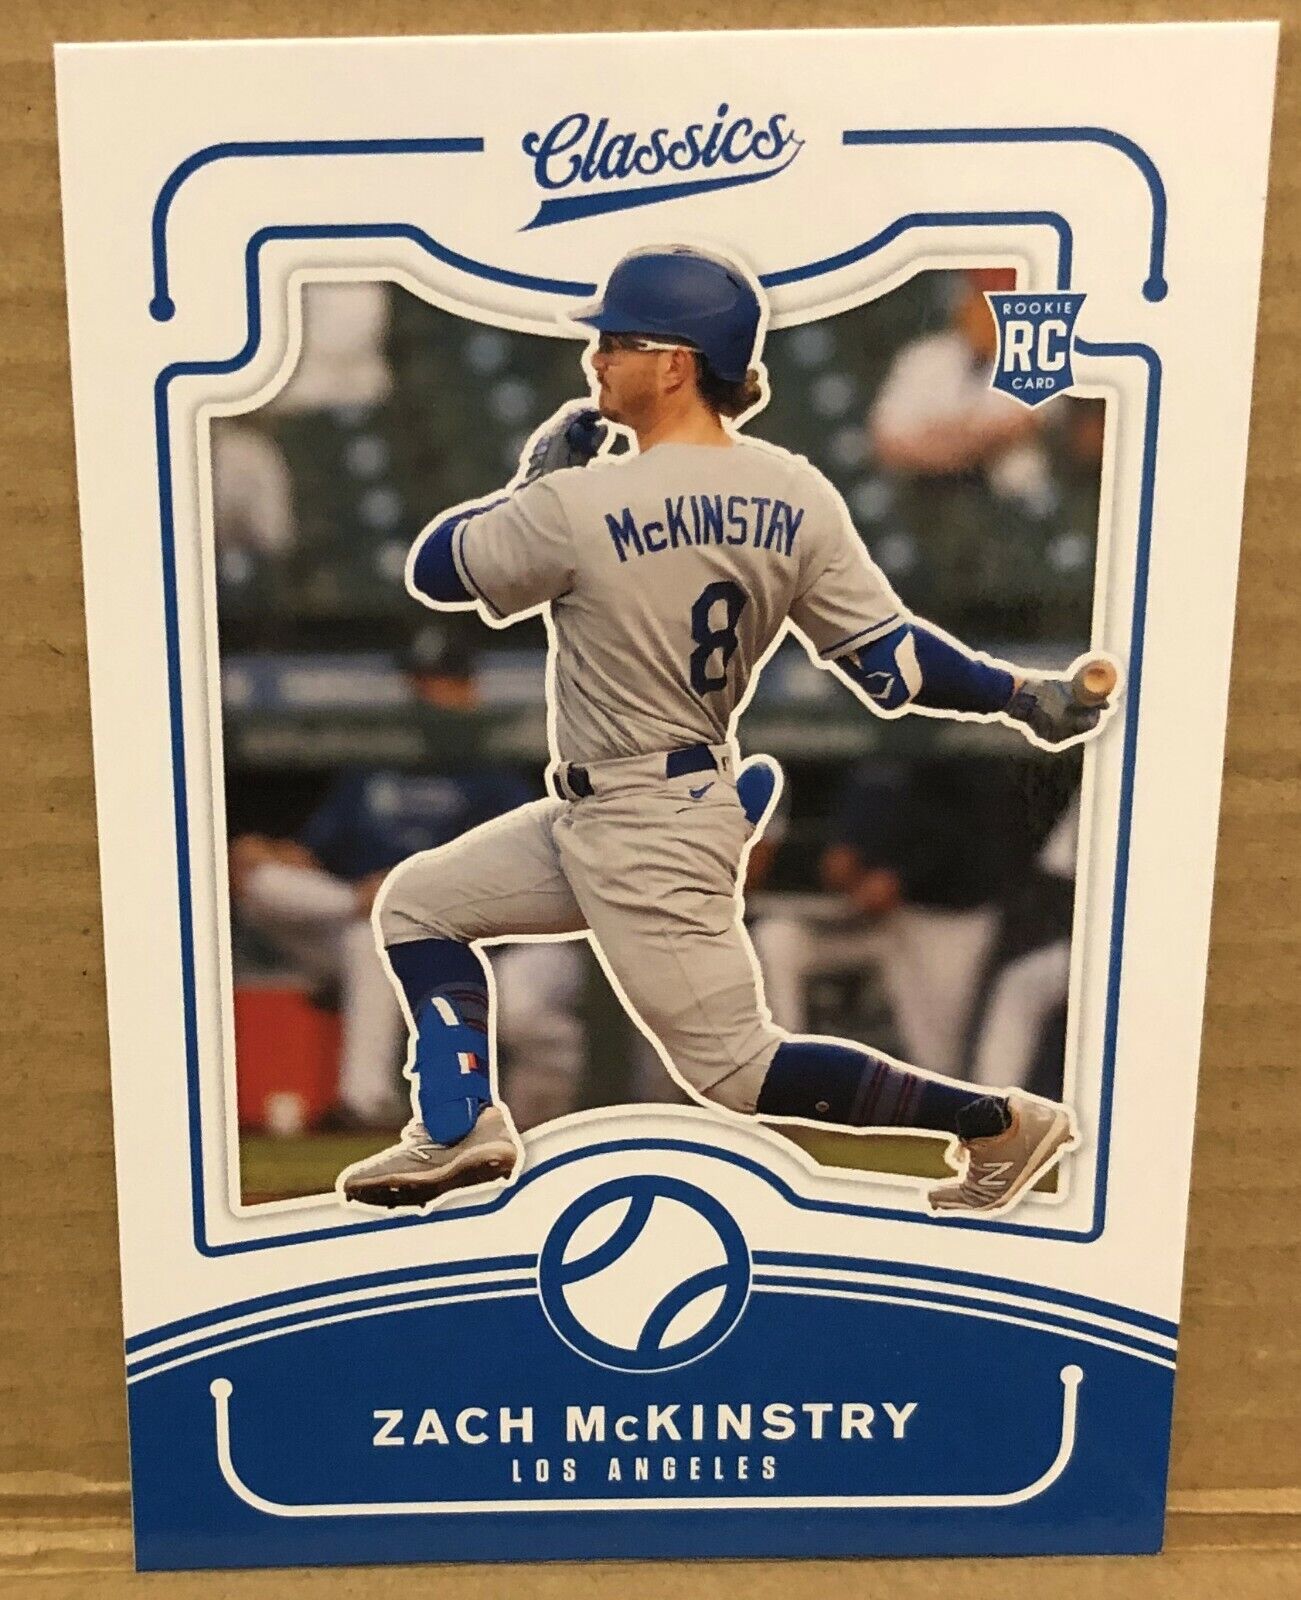 ZACH McKINSTRY(LOS ANGELES DODGERS)2021 PANINI CHRONICLES CLASSICS ROOKIE CARD